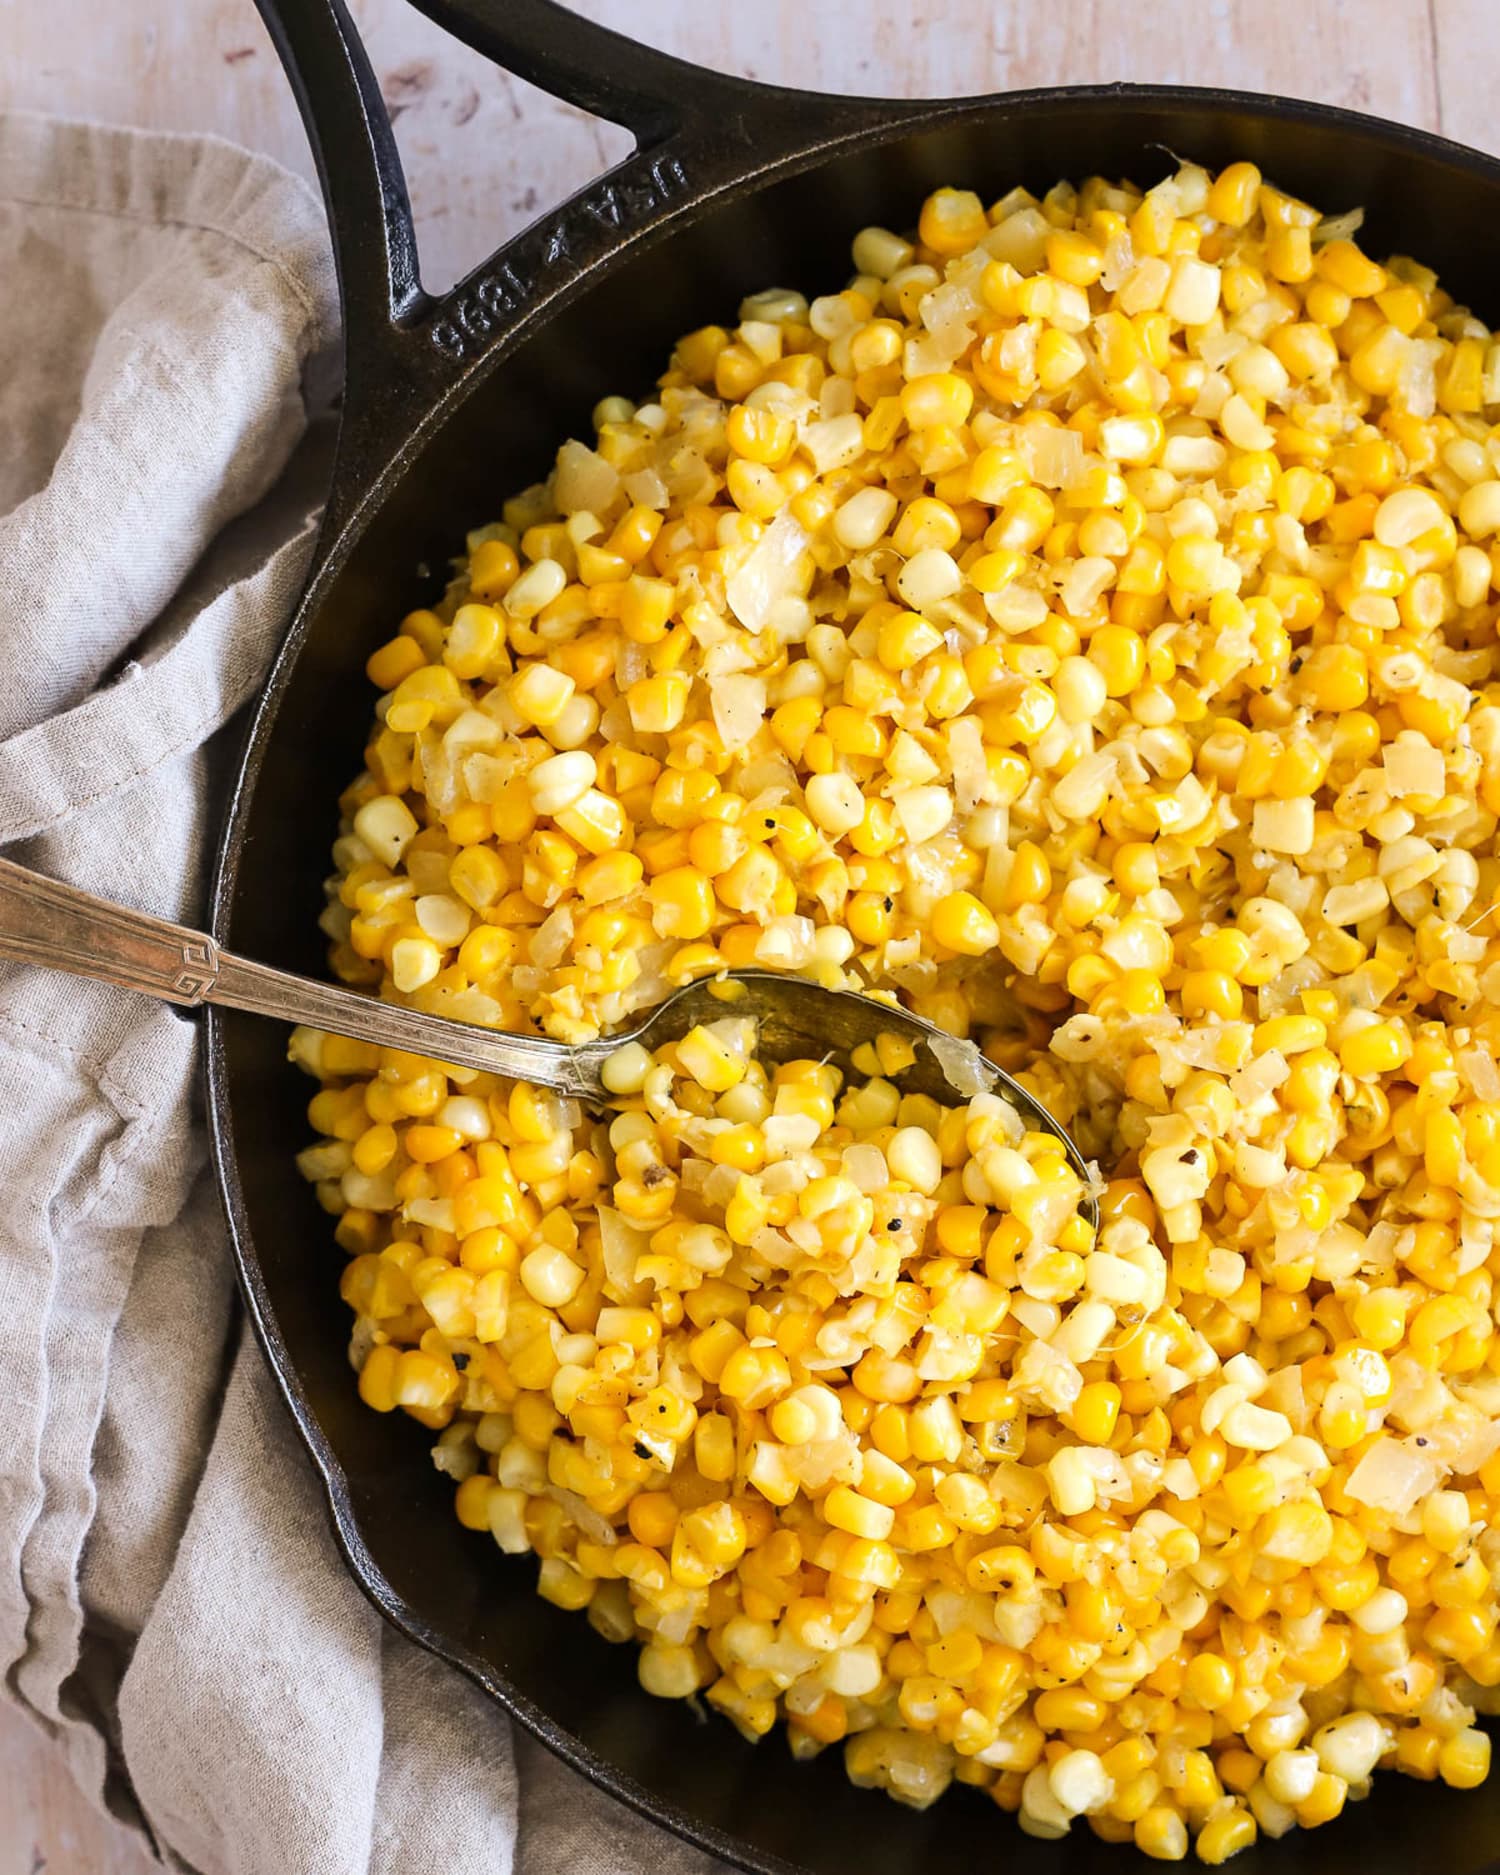 Southern Fried Corn Is Quick and Flavor-Packed